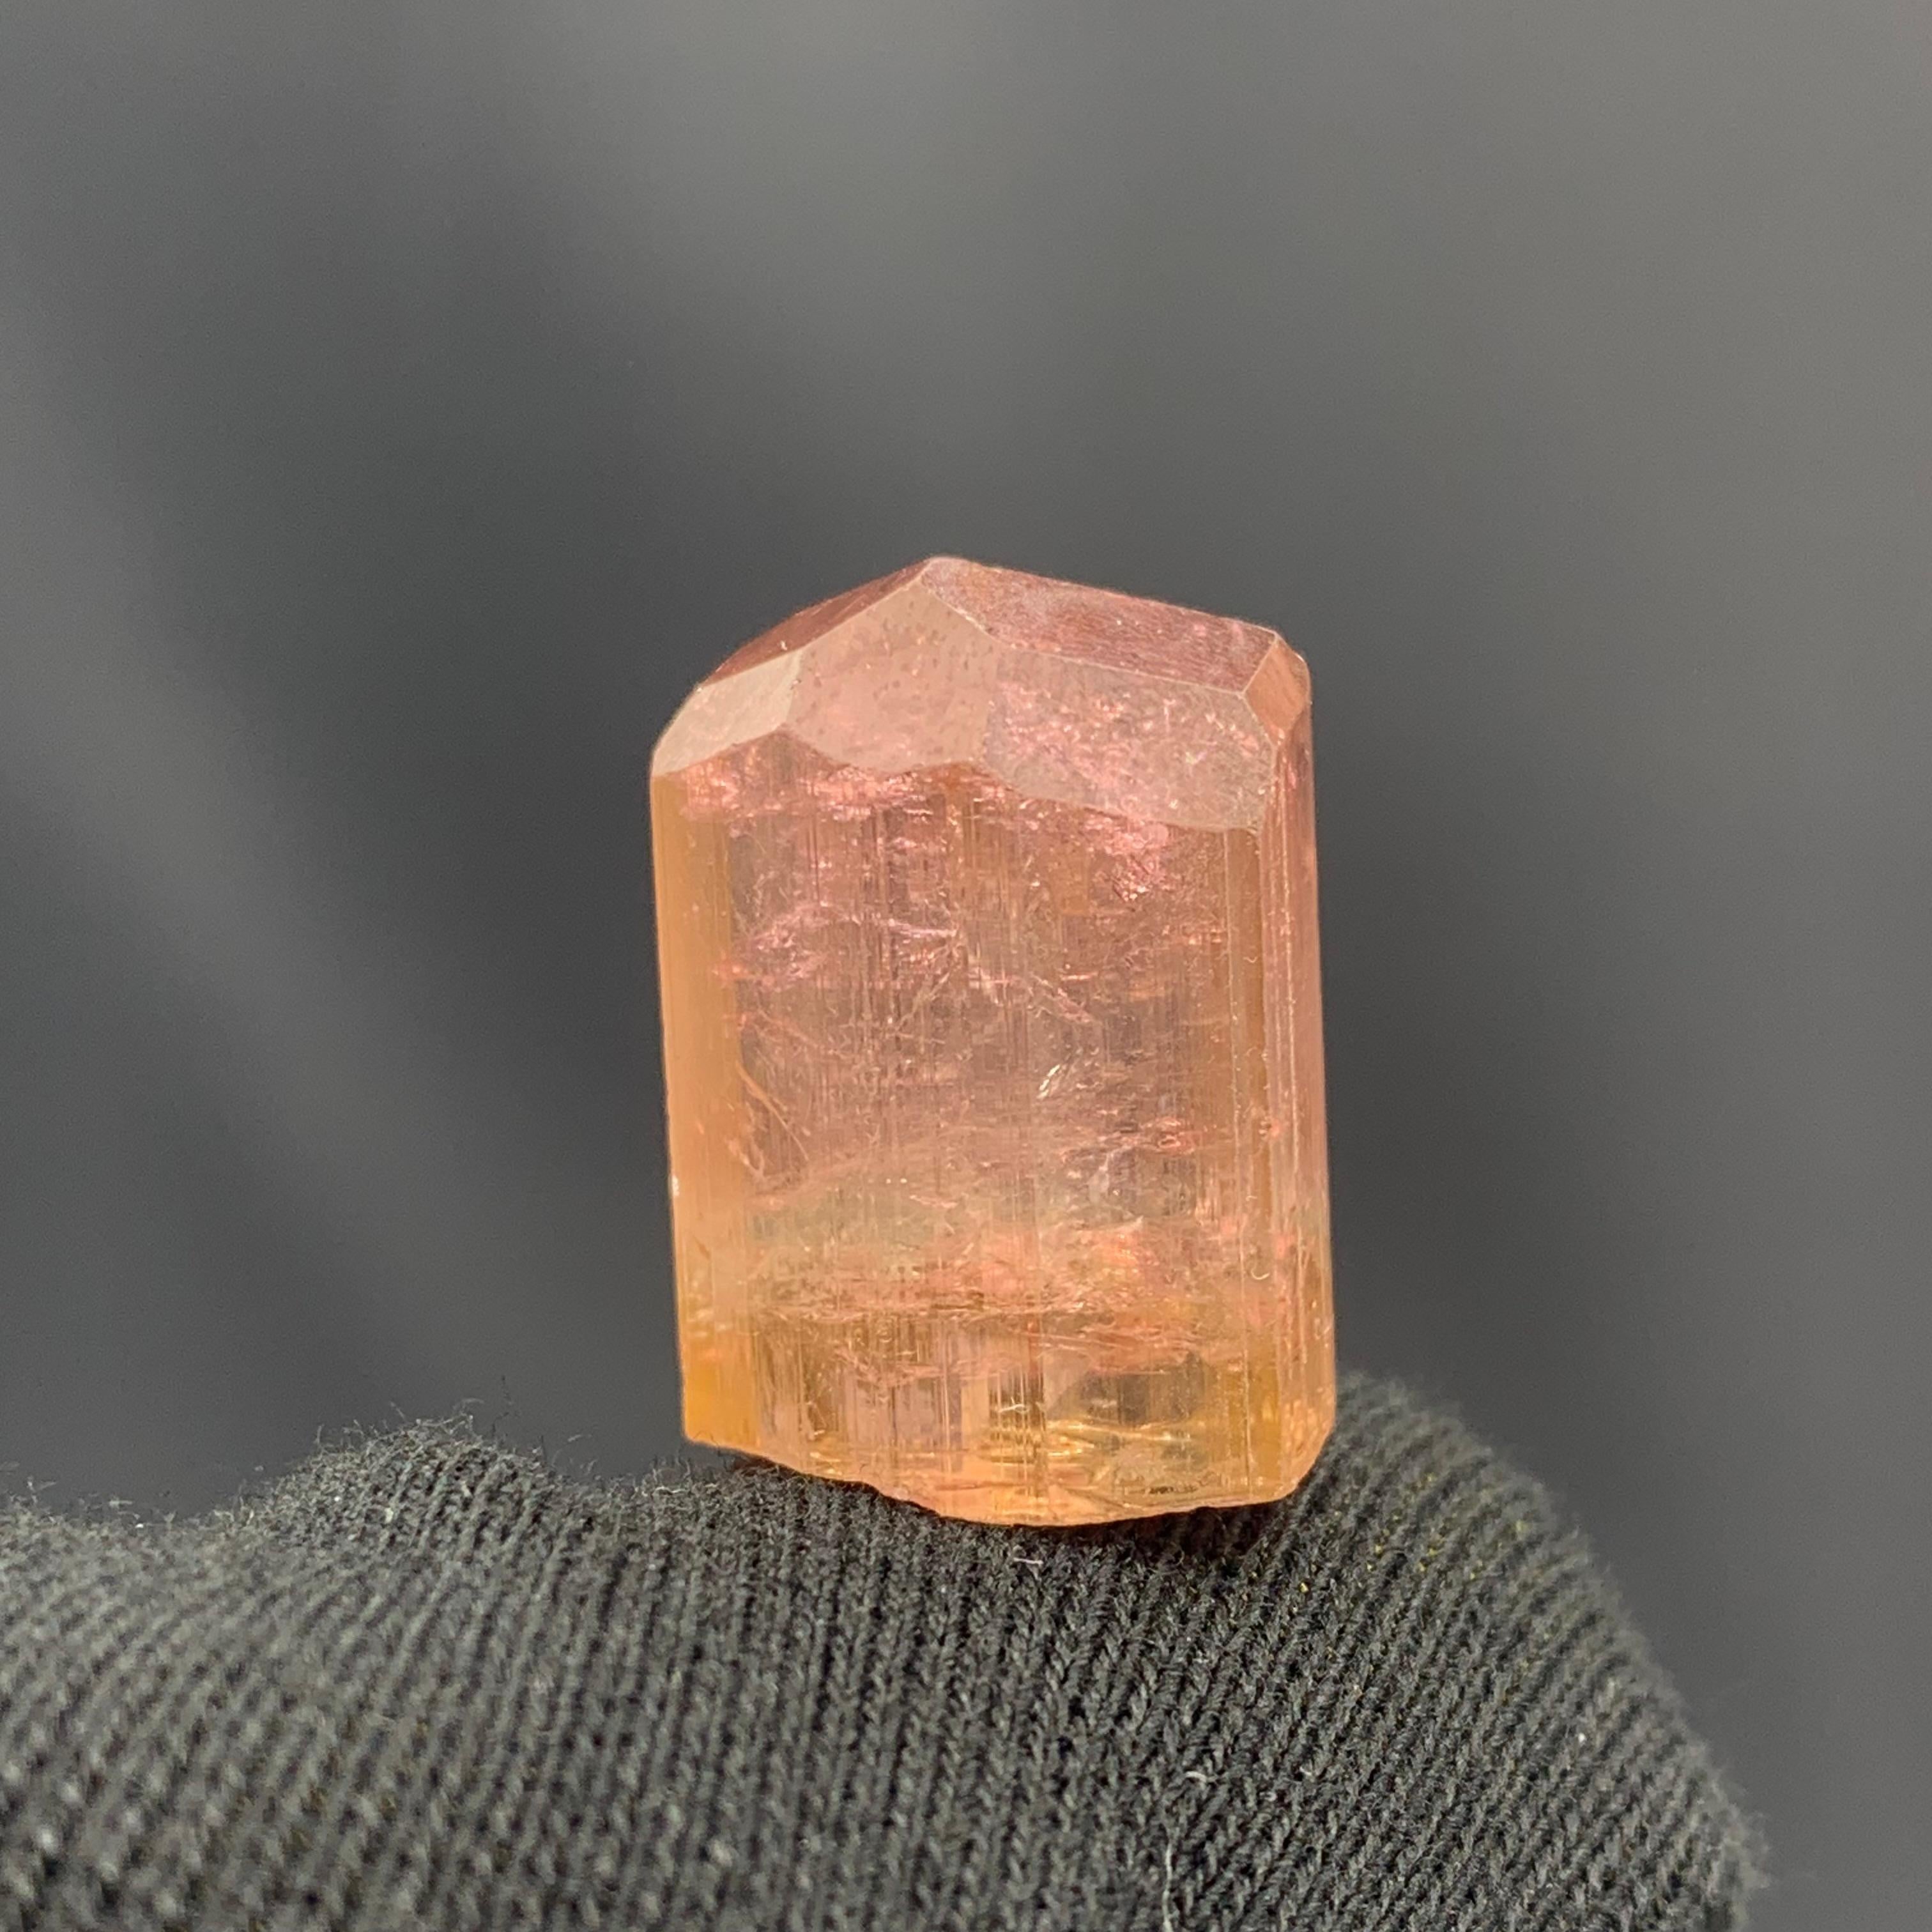 62.70 Carat Lovely Peach Color Tourmaline Crystal from Paprook, Afghanistan For Sale 1